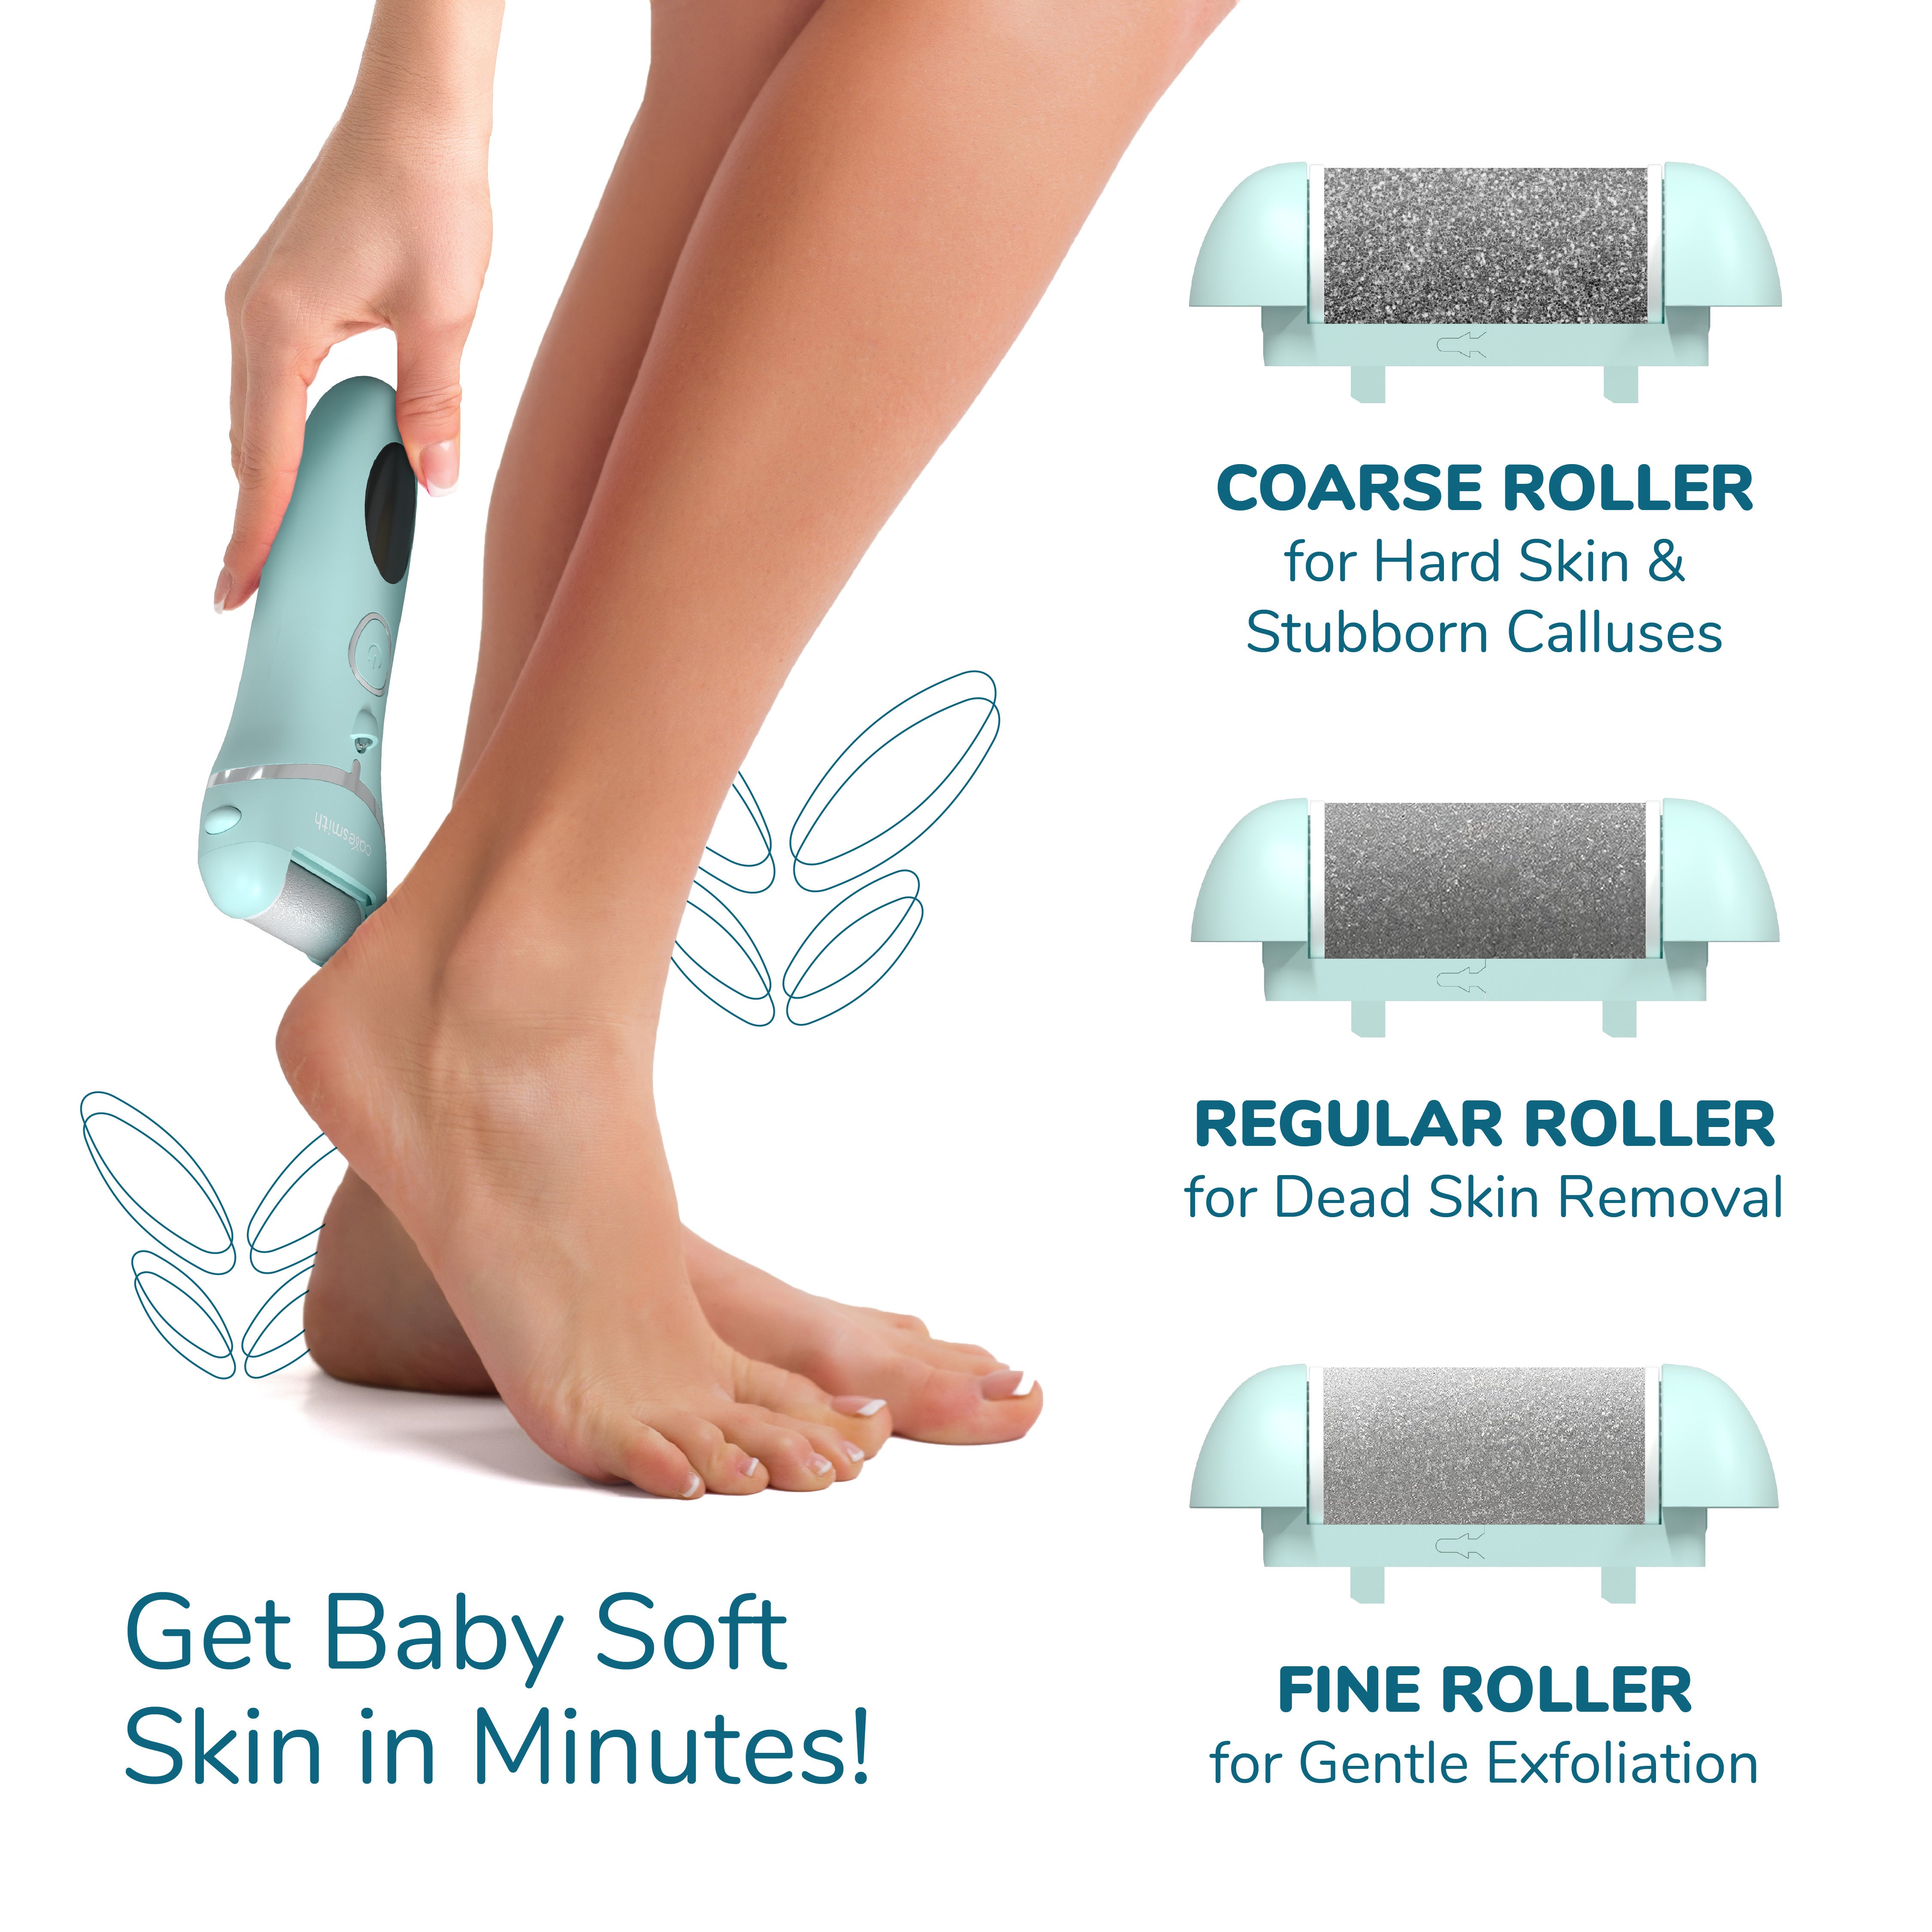 Premium Foot File 2-in-1 Callus Remover for Feet with Dead Skin